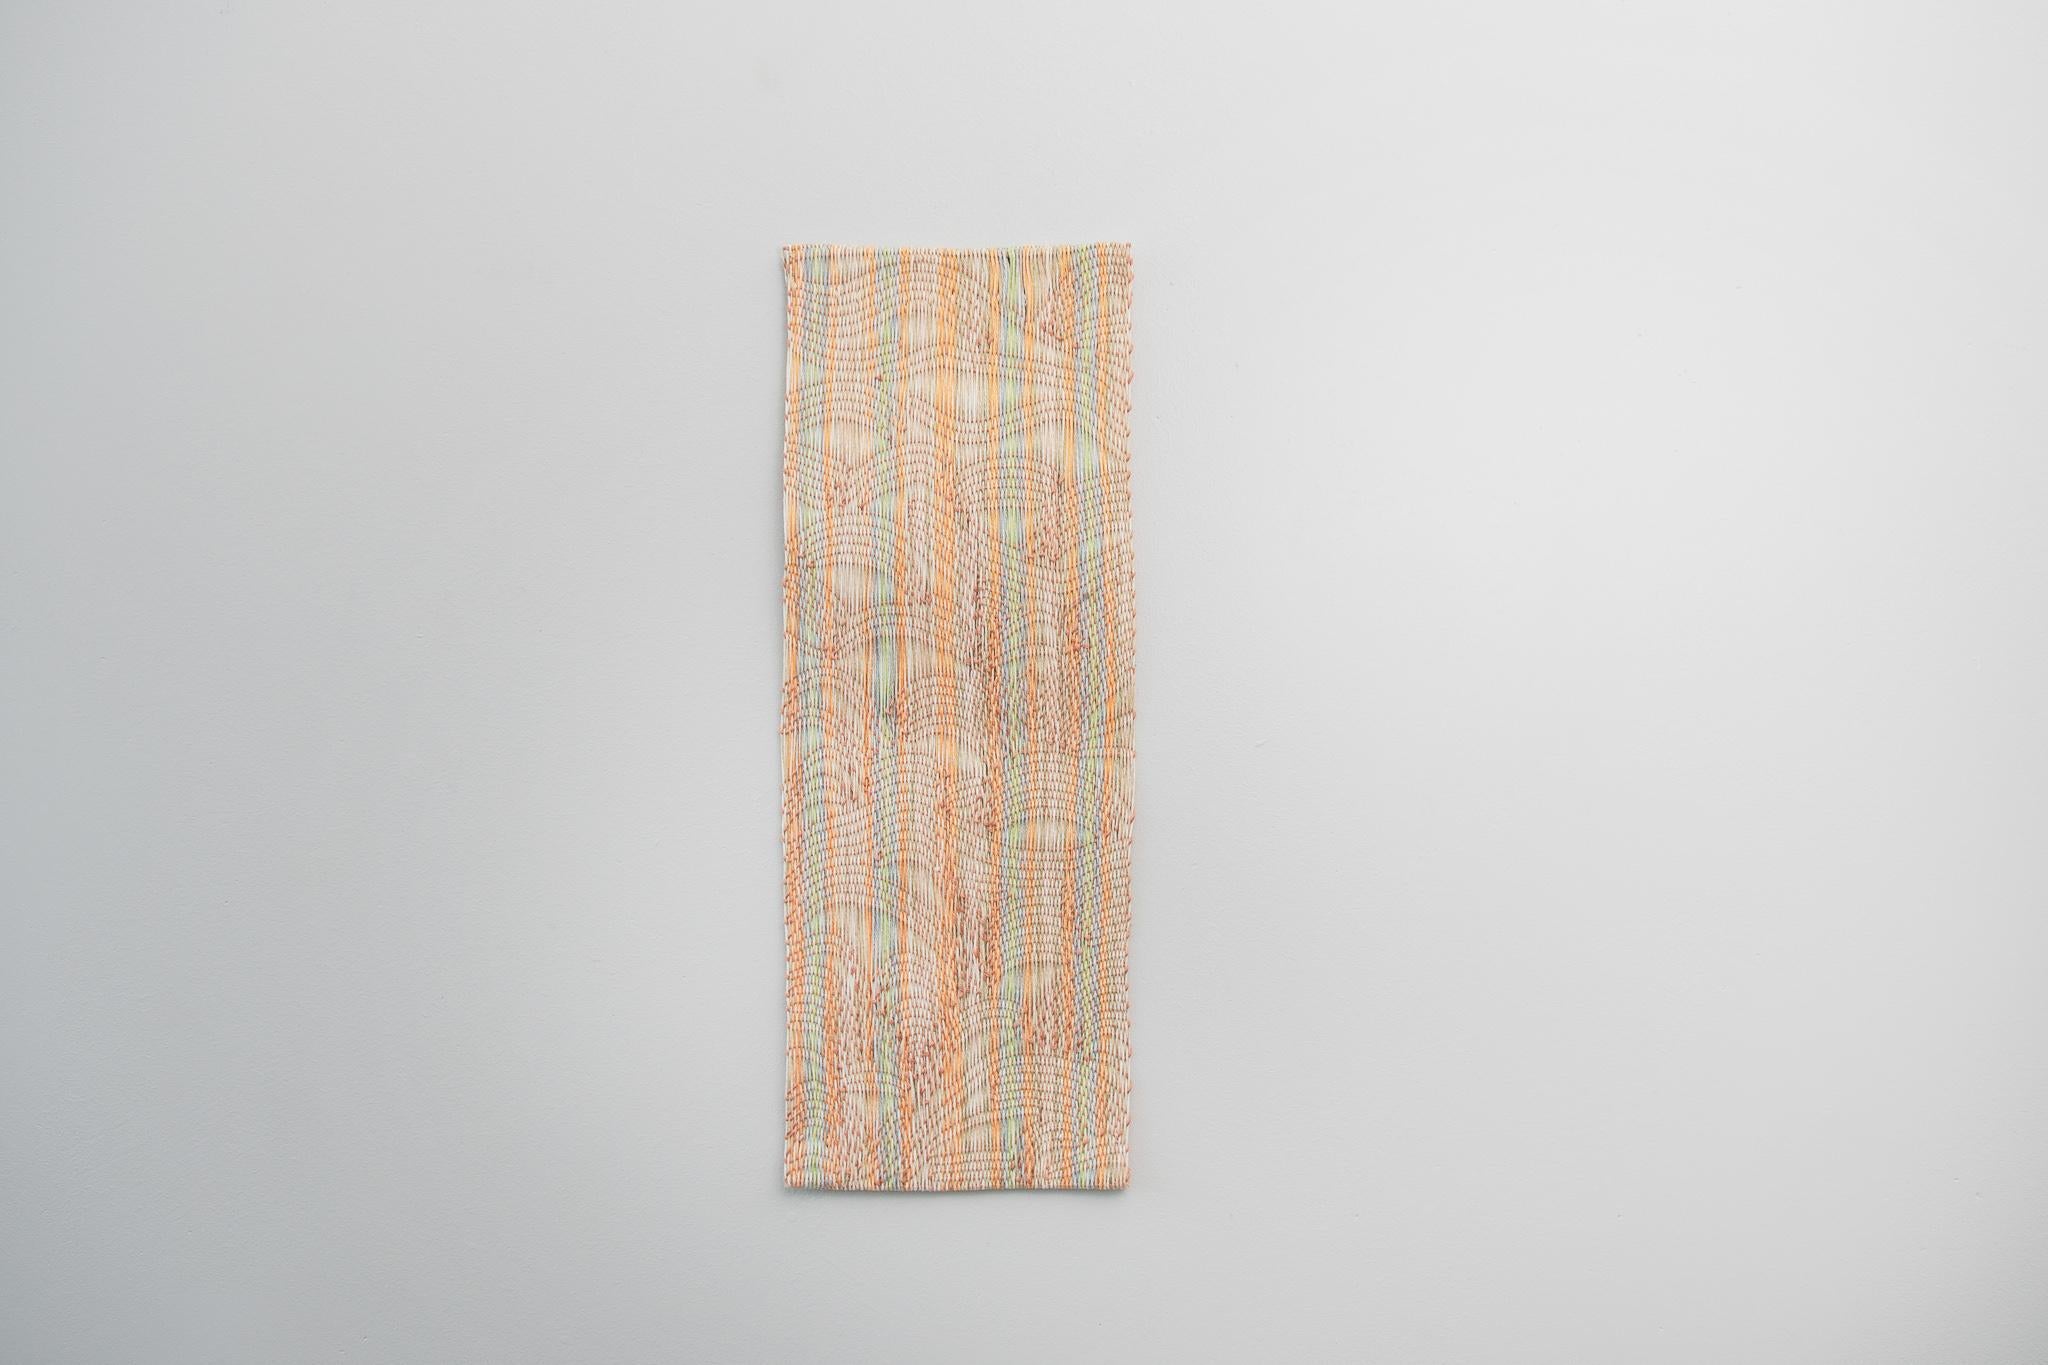 Untitled, 2019. 100% Cotton Hand Woven. Mind to Hand Collection, 460 x 170mm

Born in Namibia, Lynette Diergaardt received her Bachelors of Art from the University of Namibia and her Masters in Textiles as a Fulbright Scholar at Kent State